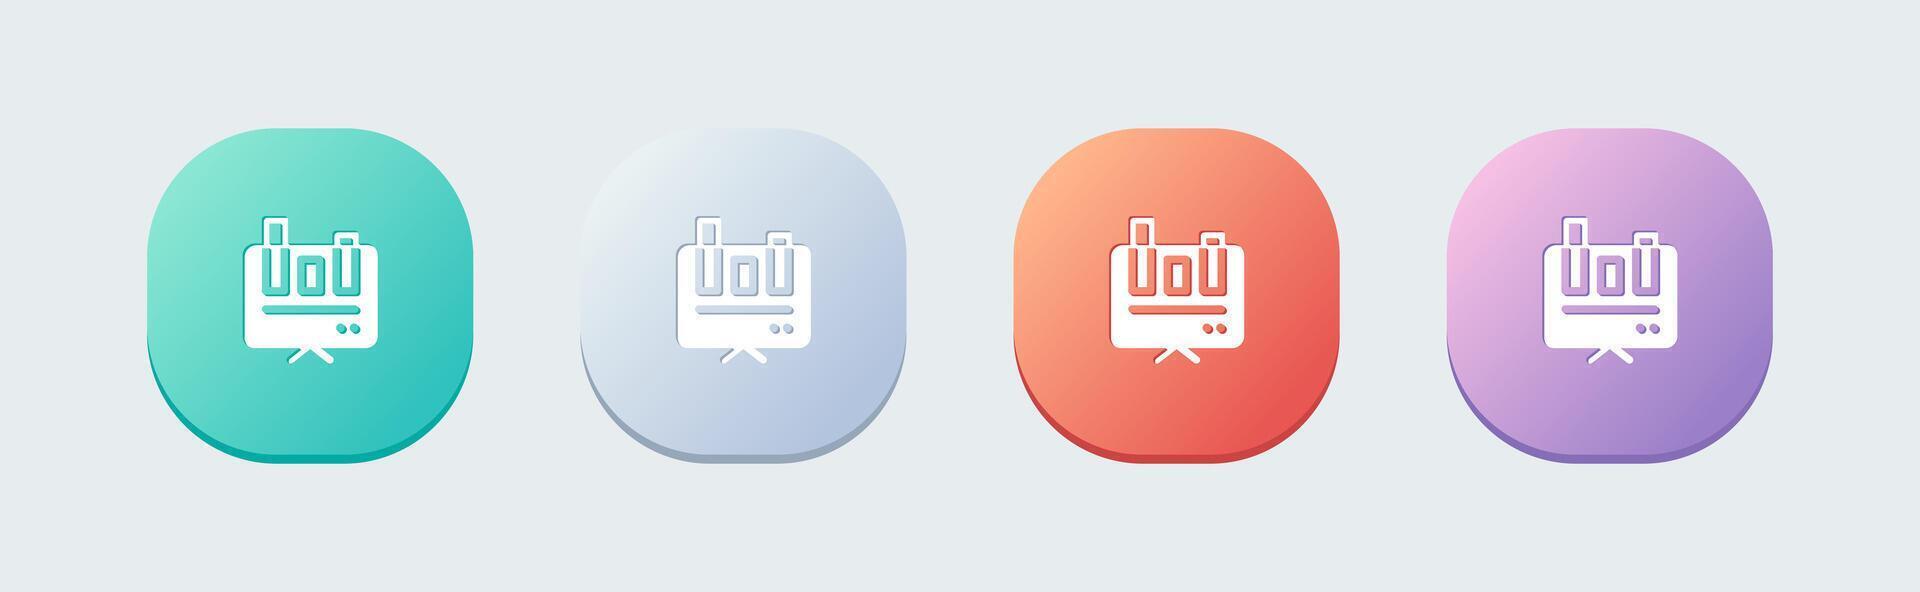 Data solid icon in flat design style. Analysis signs vector illustration.